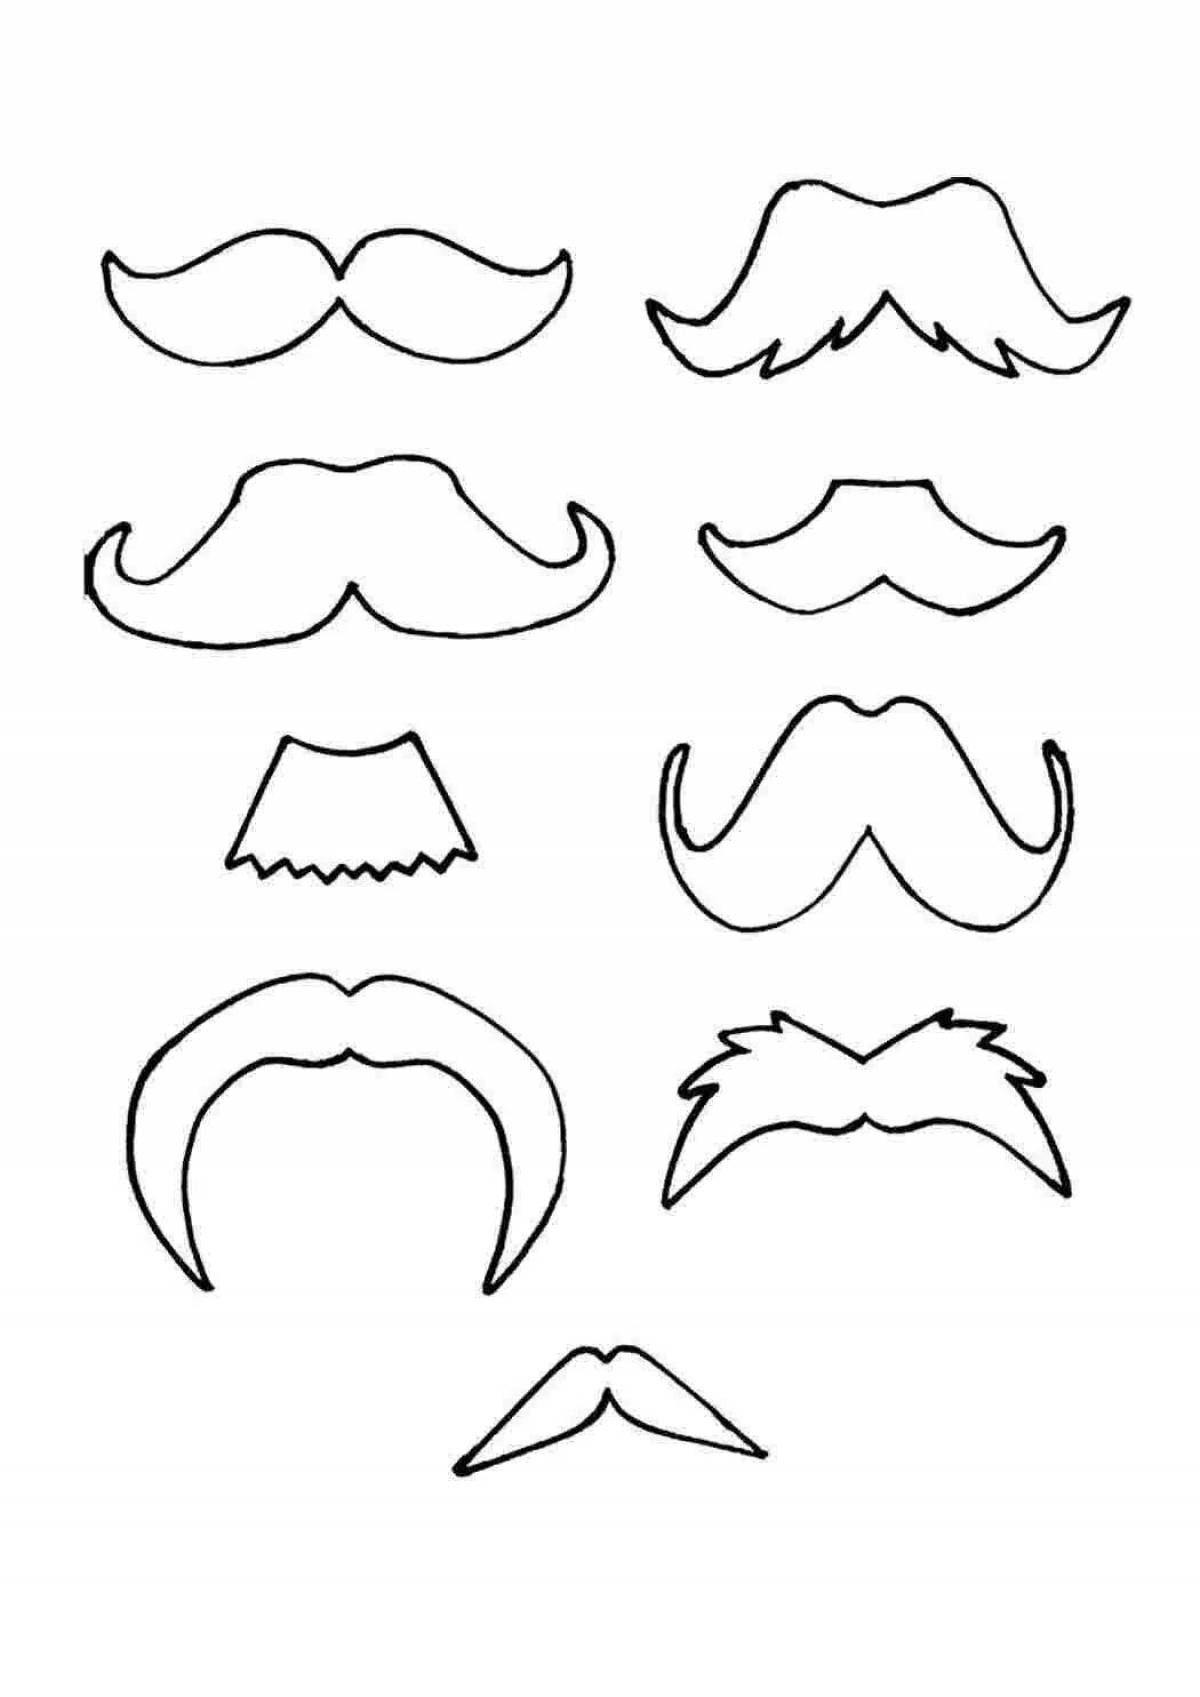 Fun mustache coloring for kids